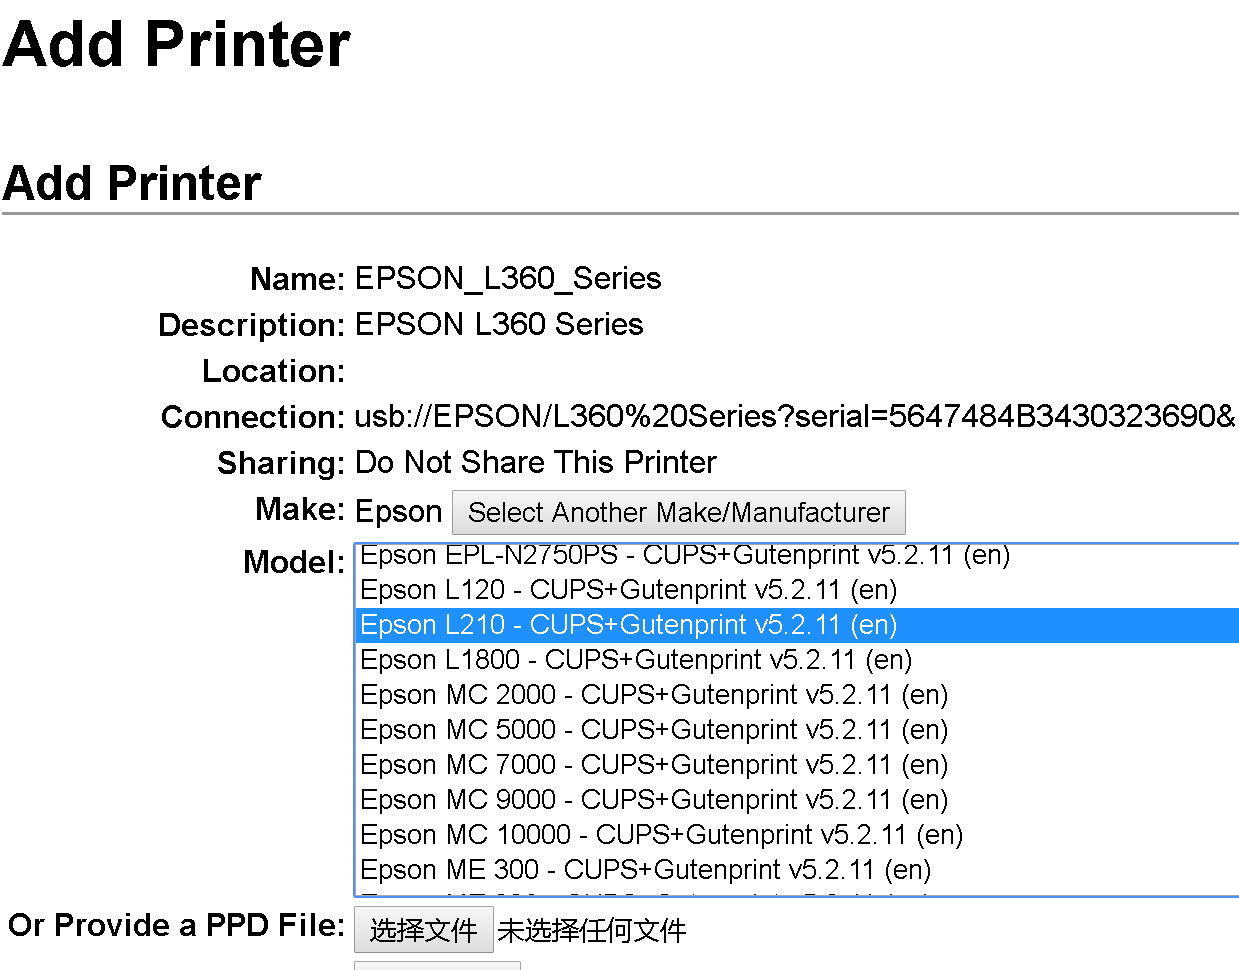 unable to find gutenprint driver named